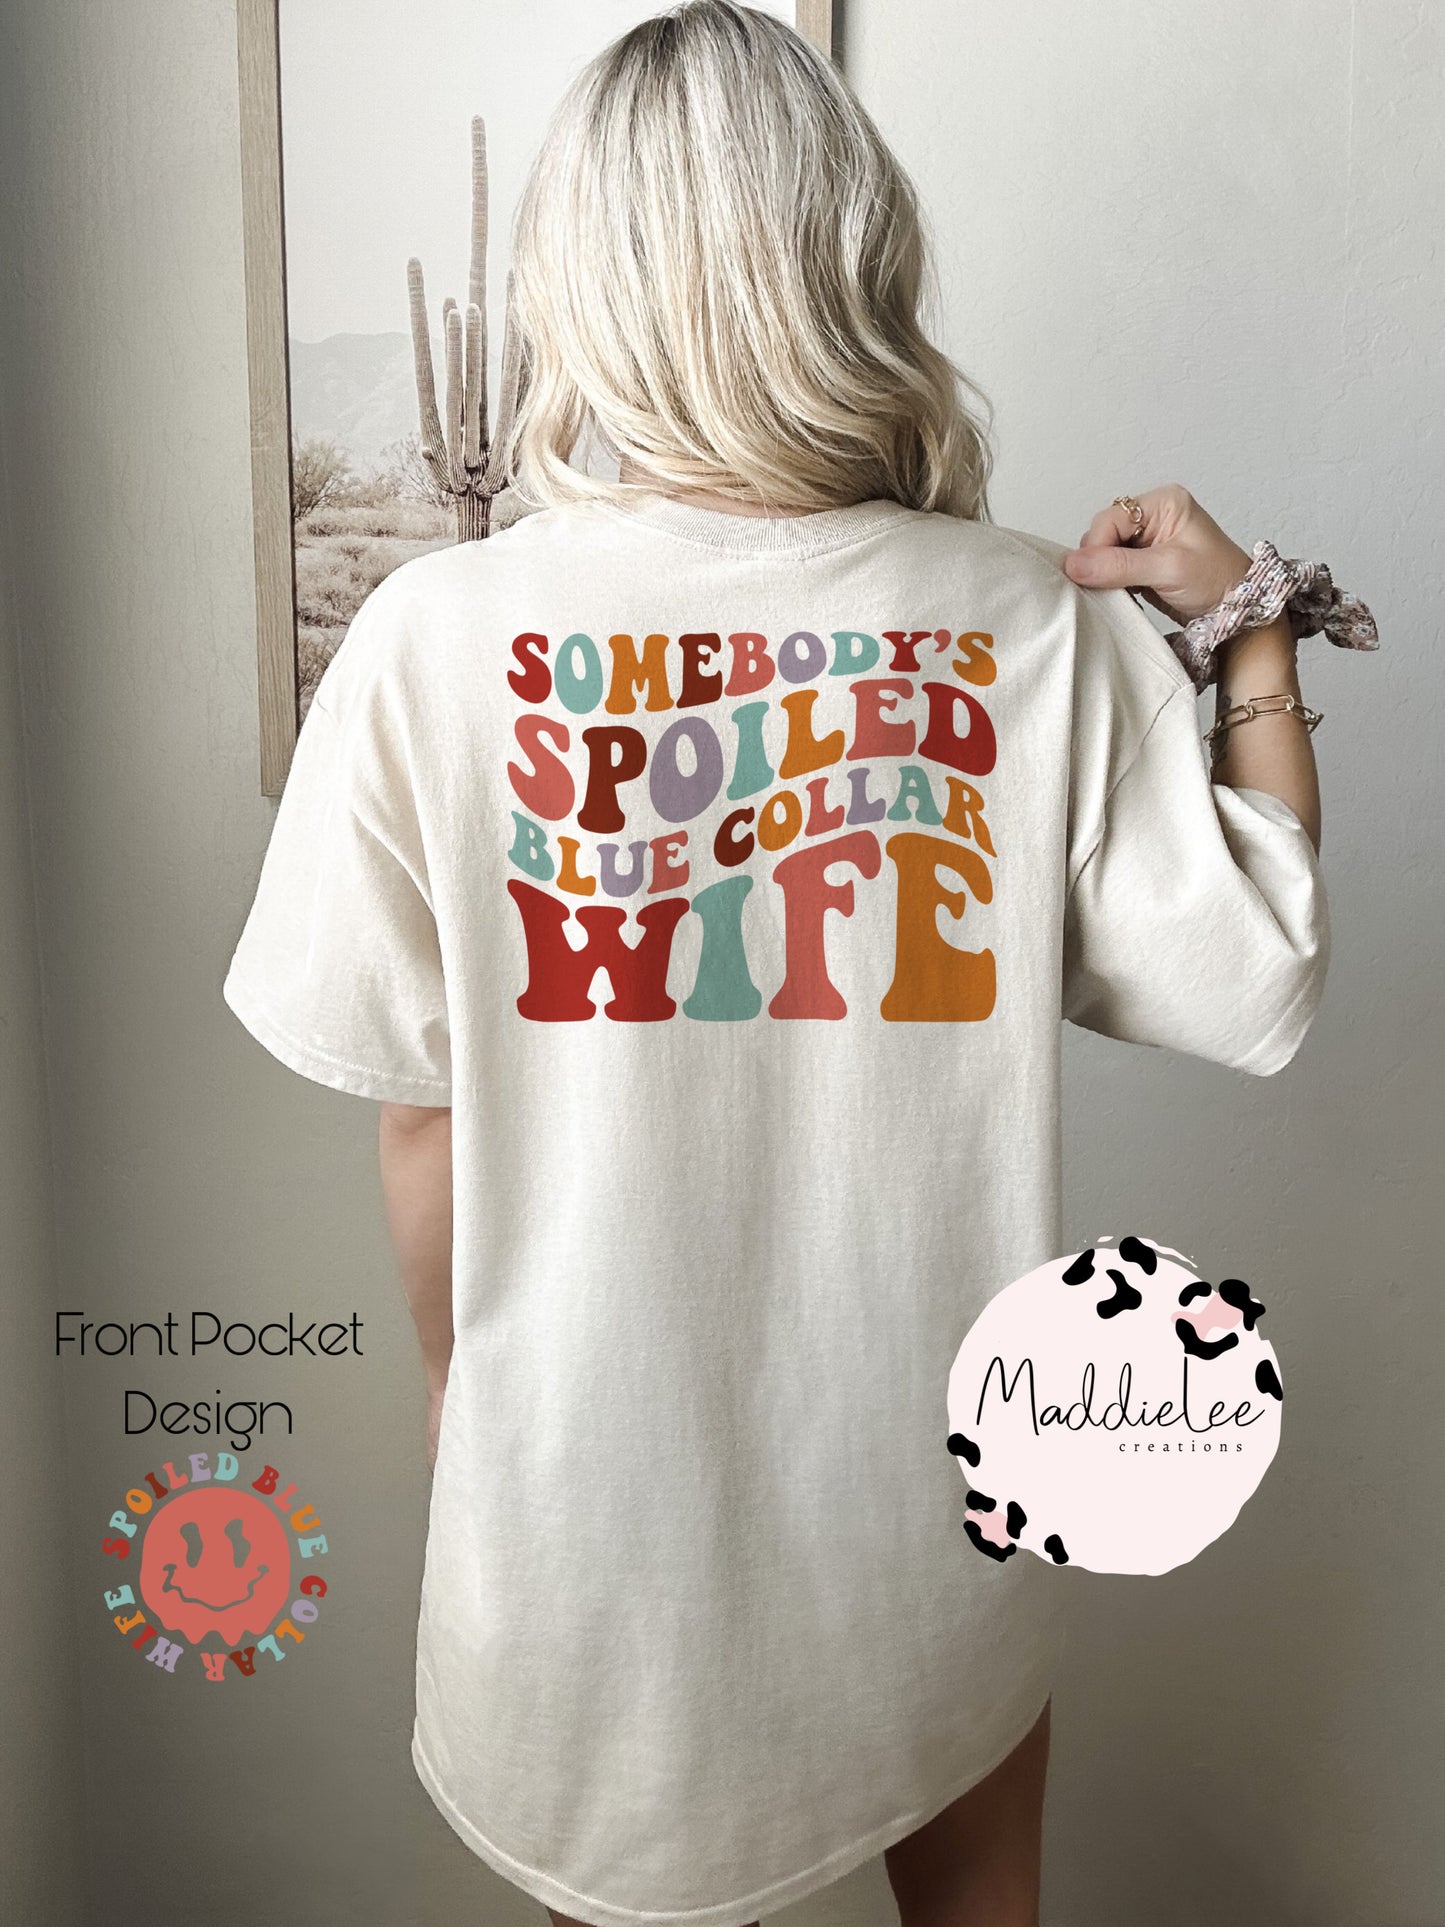 Spoiled Blue Collar Wife Adult Tee